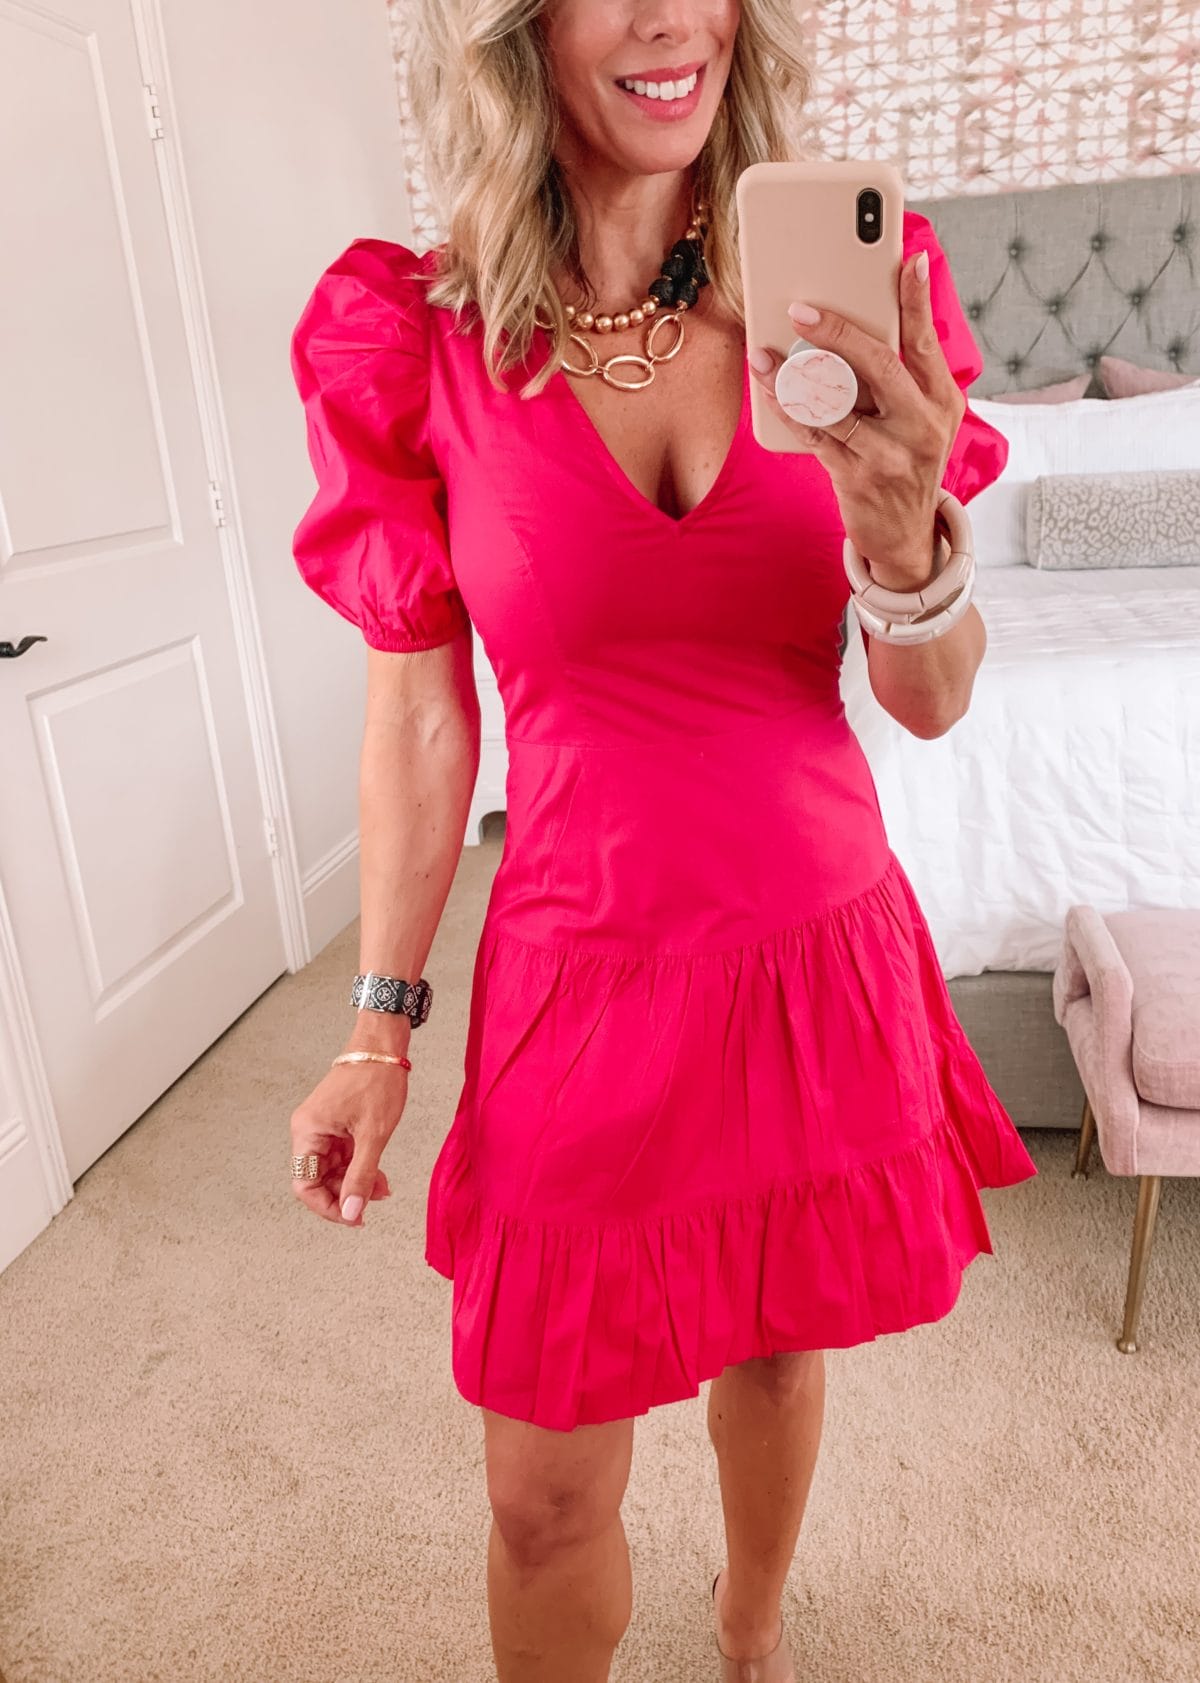 Dressing Room Finds, Pink Mini Dress with Puff Sleeves and Clear Sandals 